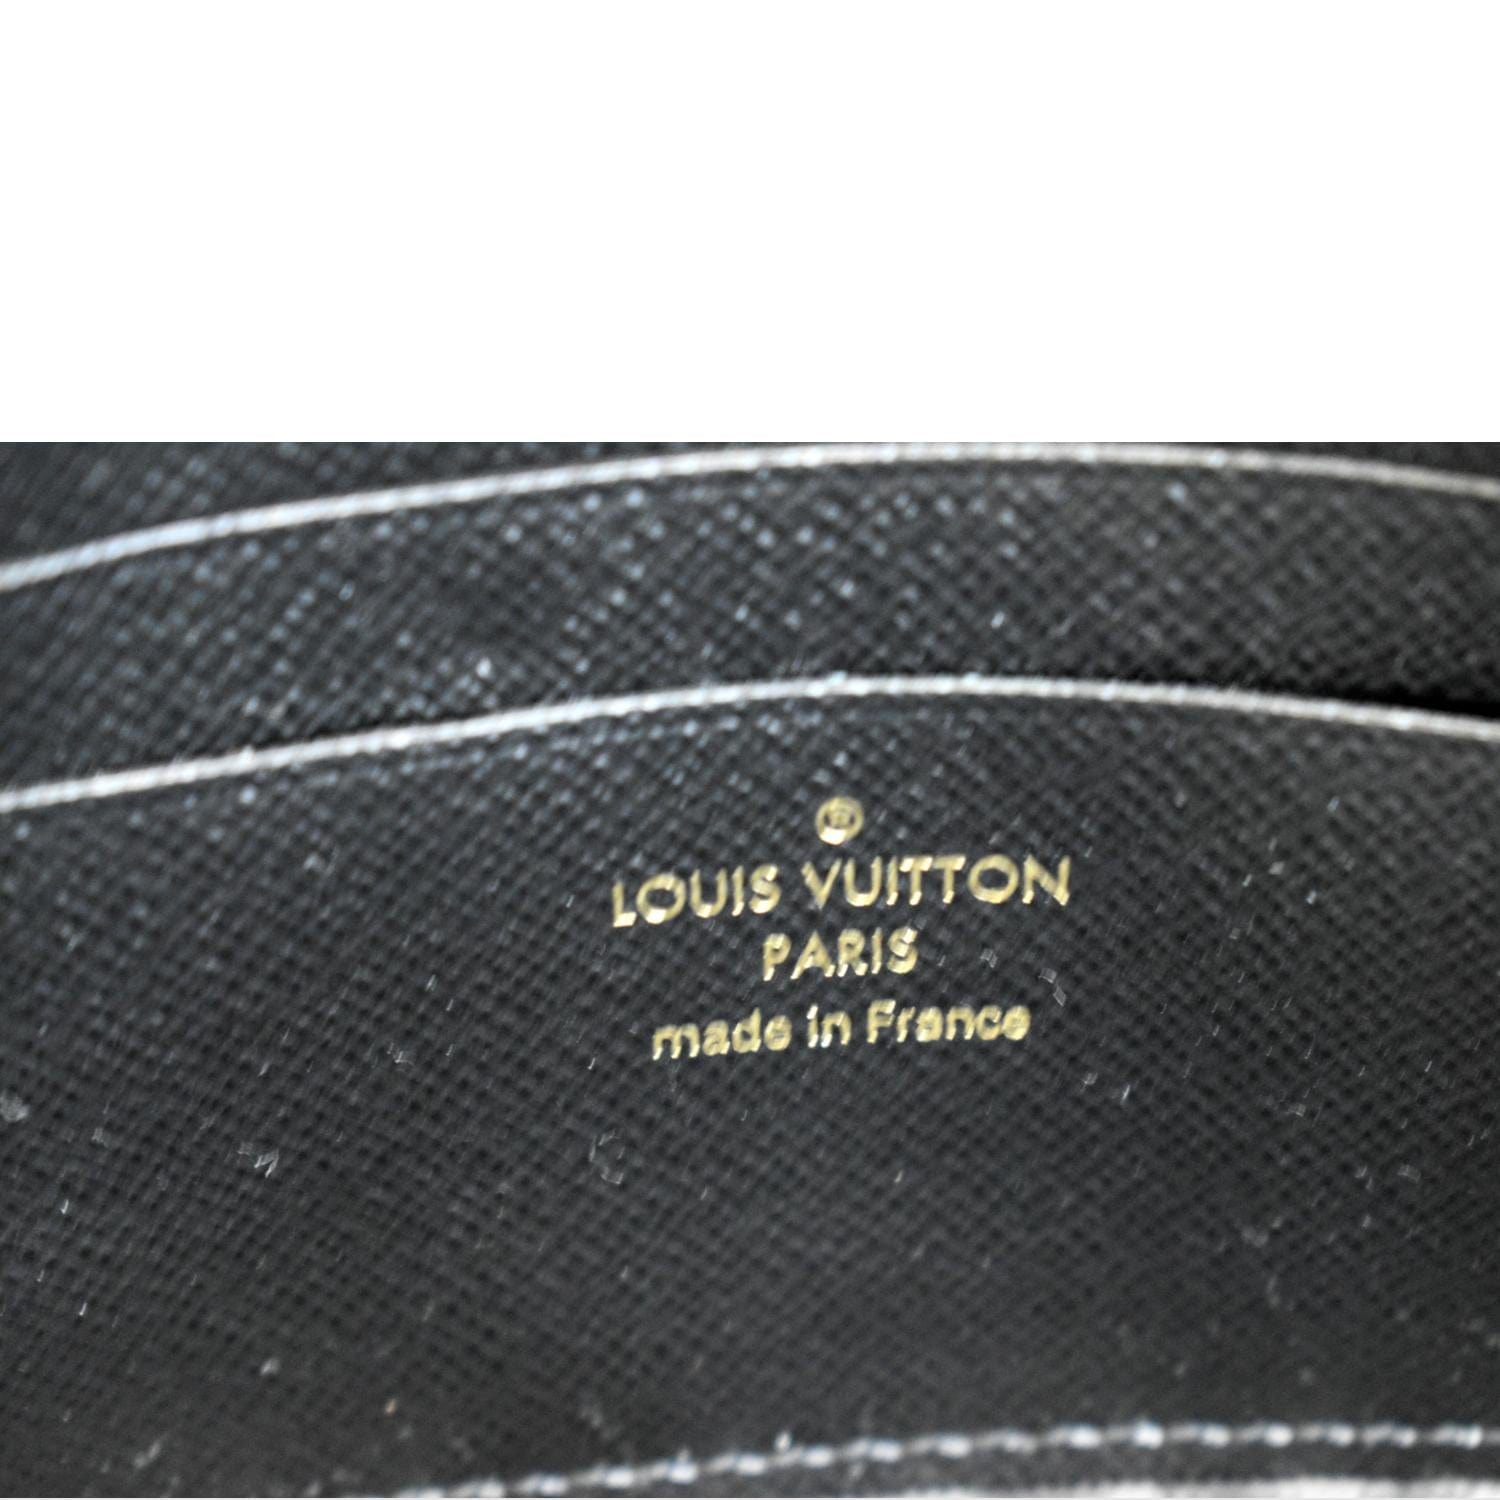 Félicie strap & go leather crossbody bag Louis Vuitton Black in Leather -  29683927